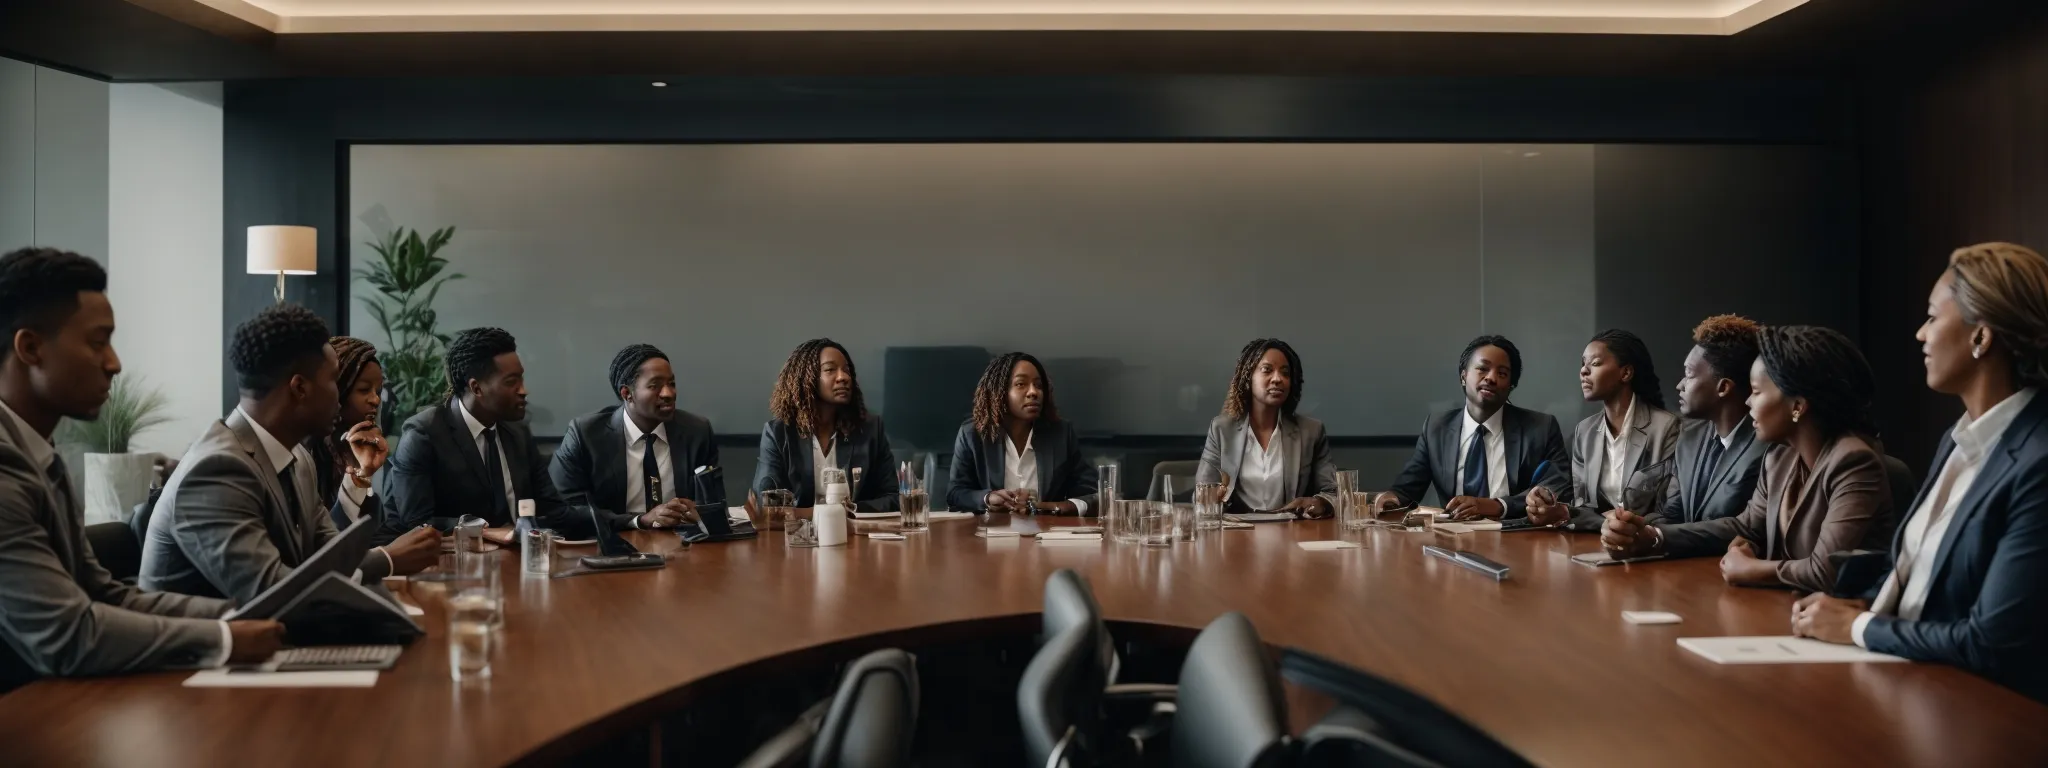 A Boardroom With A Diverse Team Engaging In A Lively Strategy Meeting, Symbolizing The Merging Of Organizational Culture And Brand Vision.